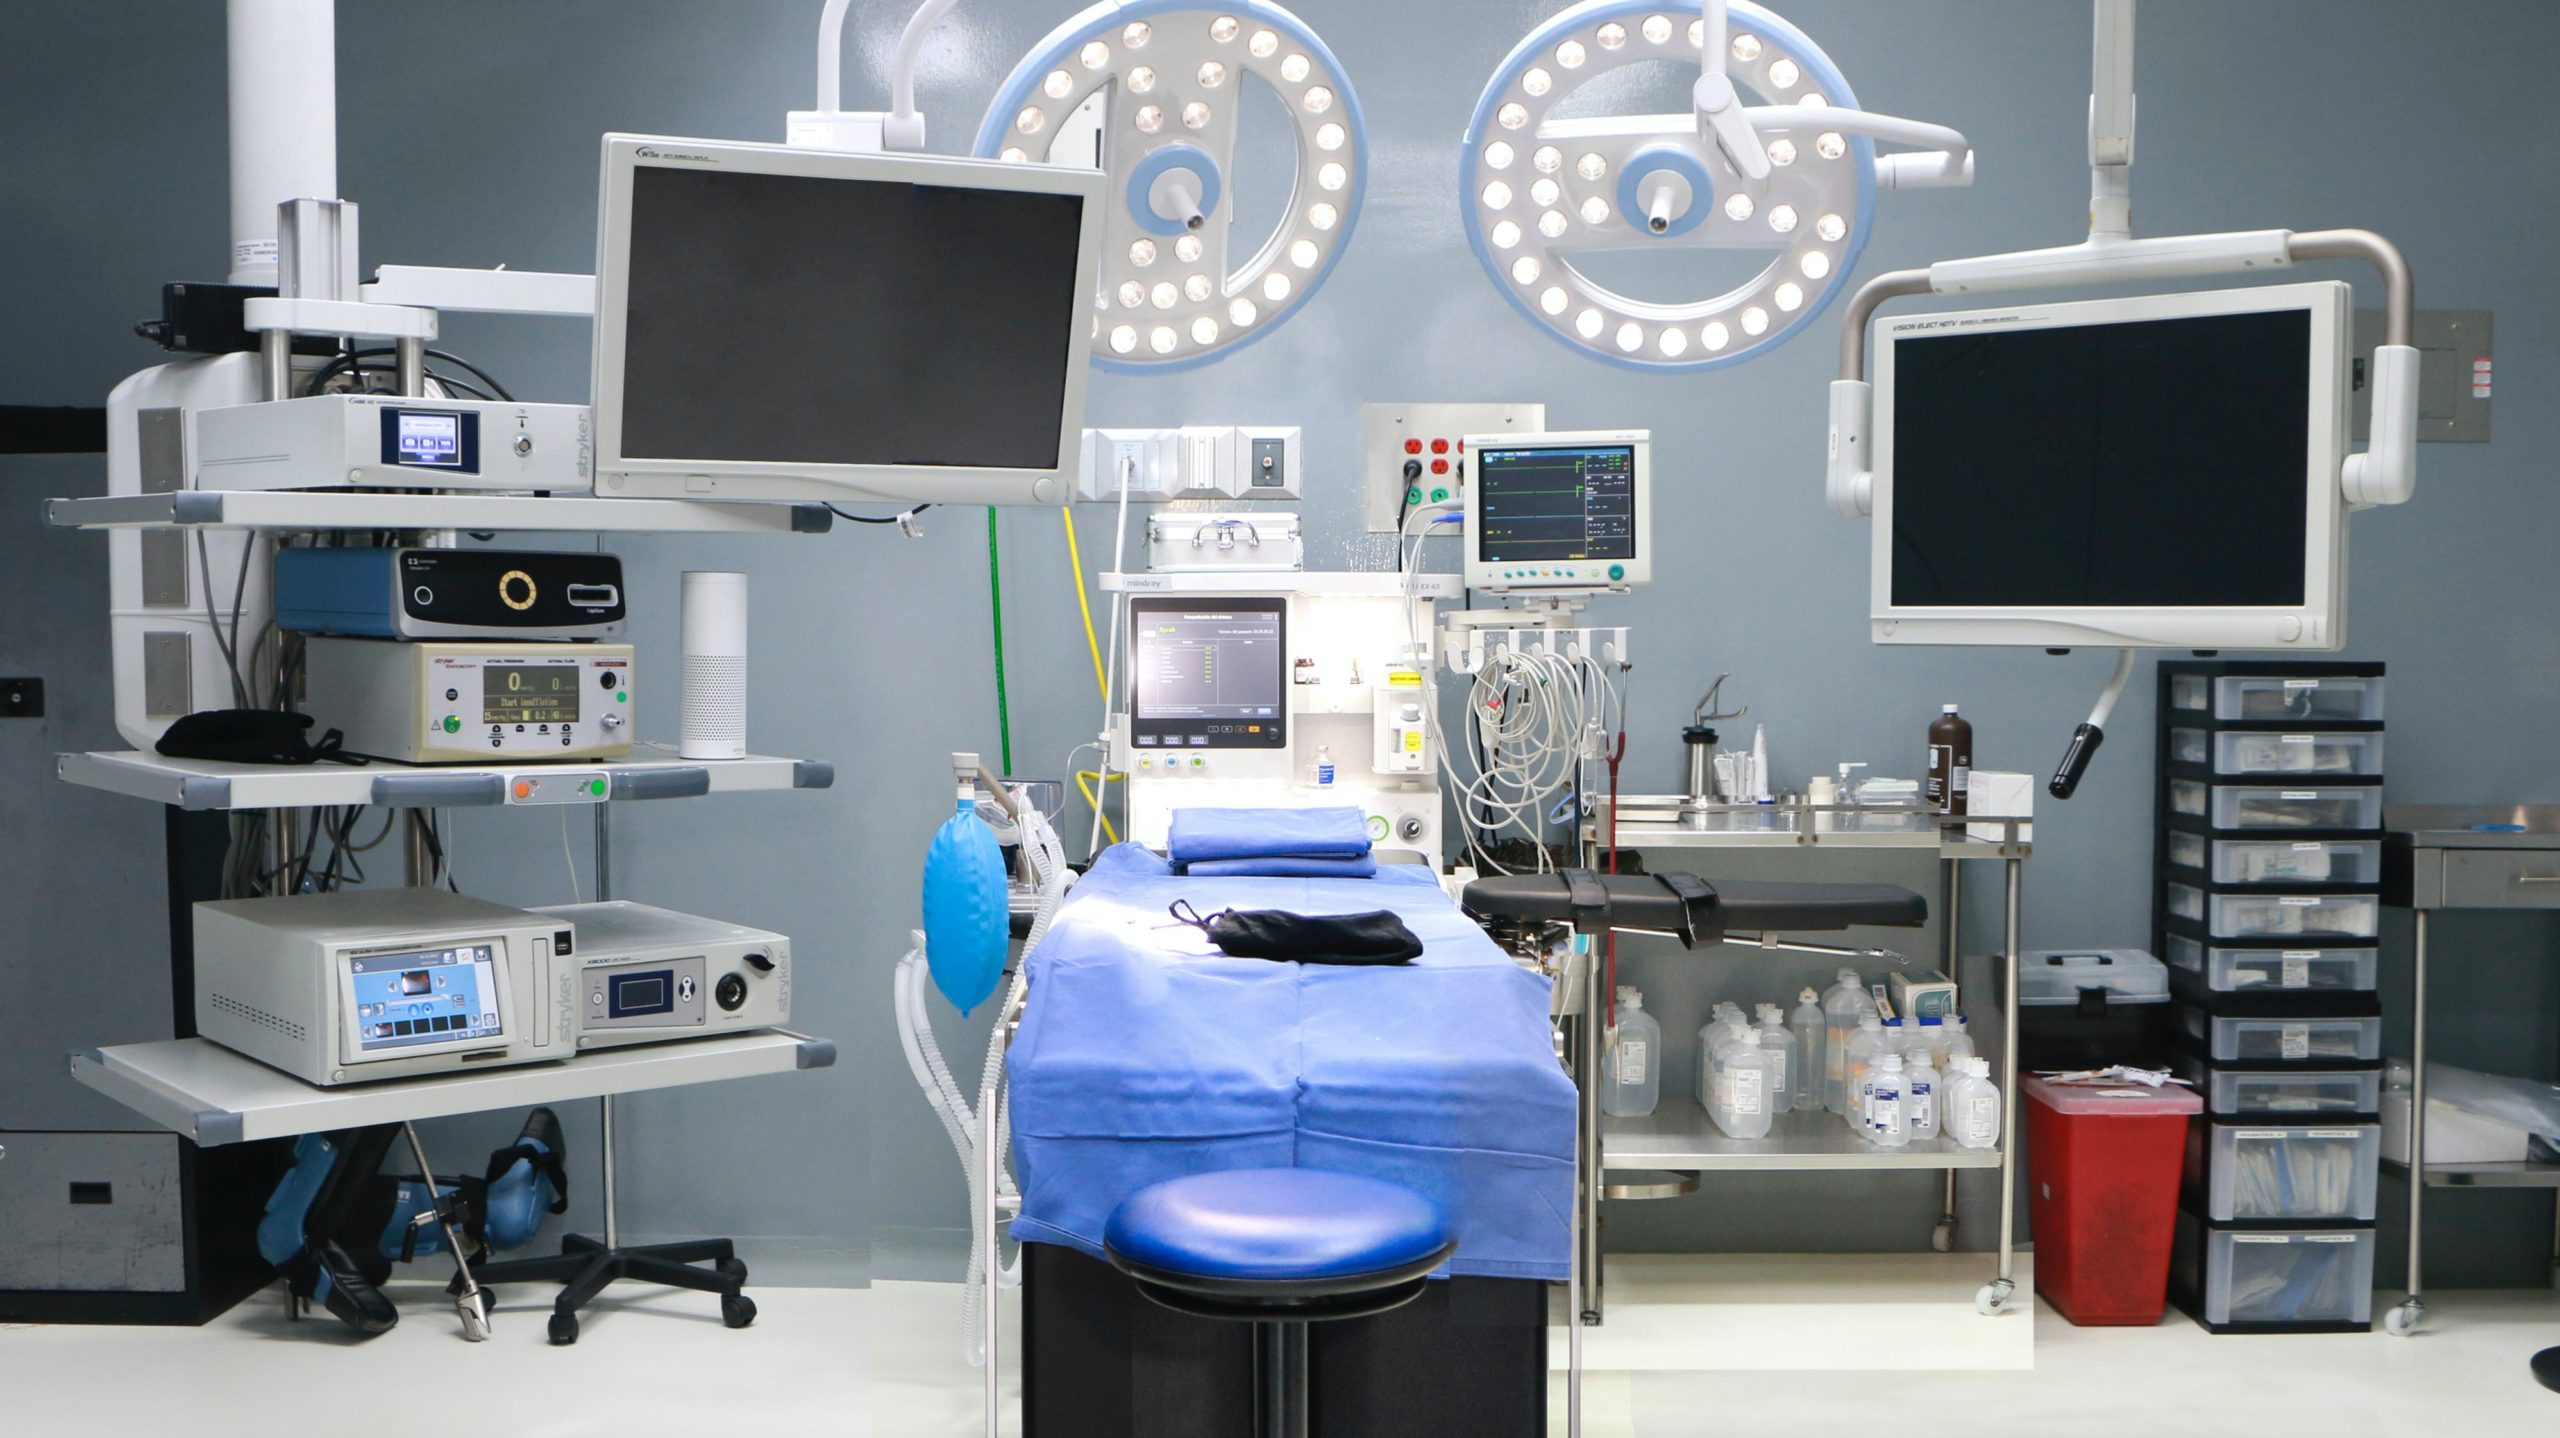 Anesthesia machine in an operating room